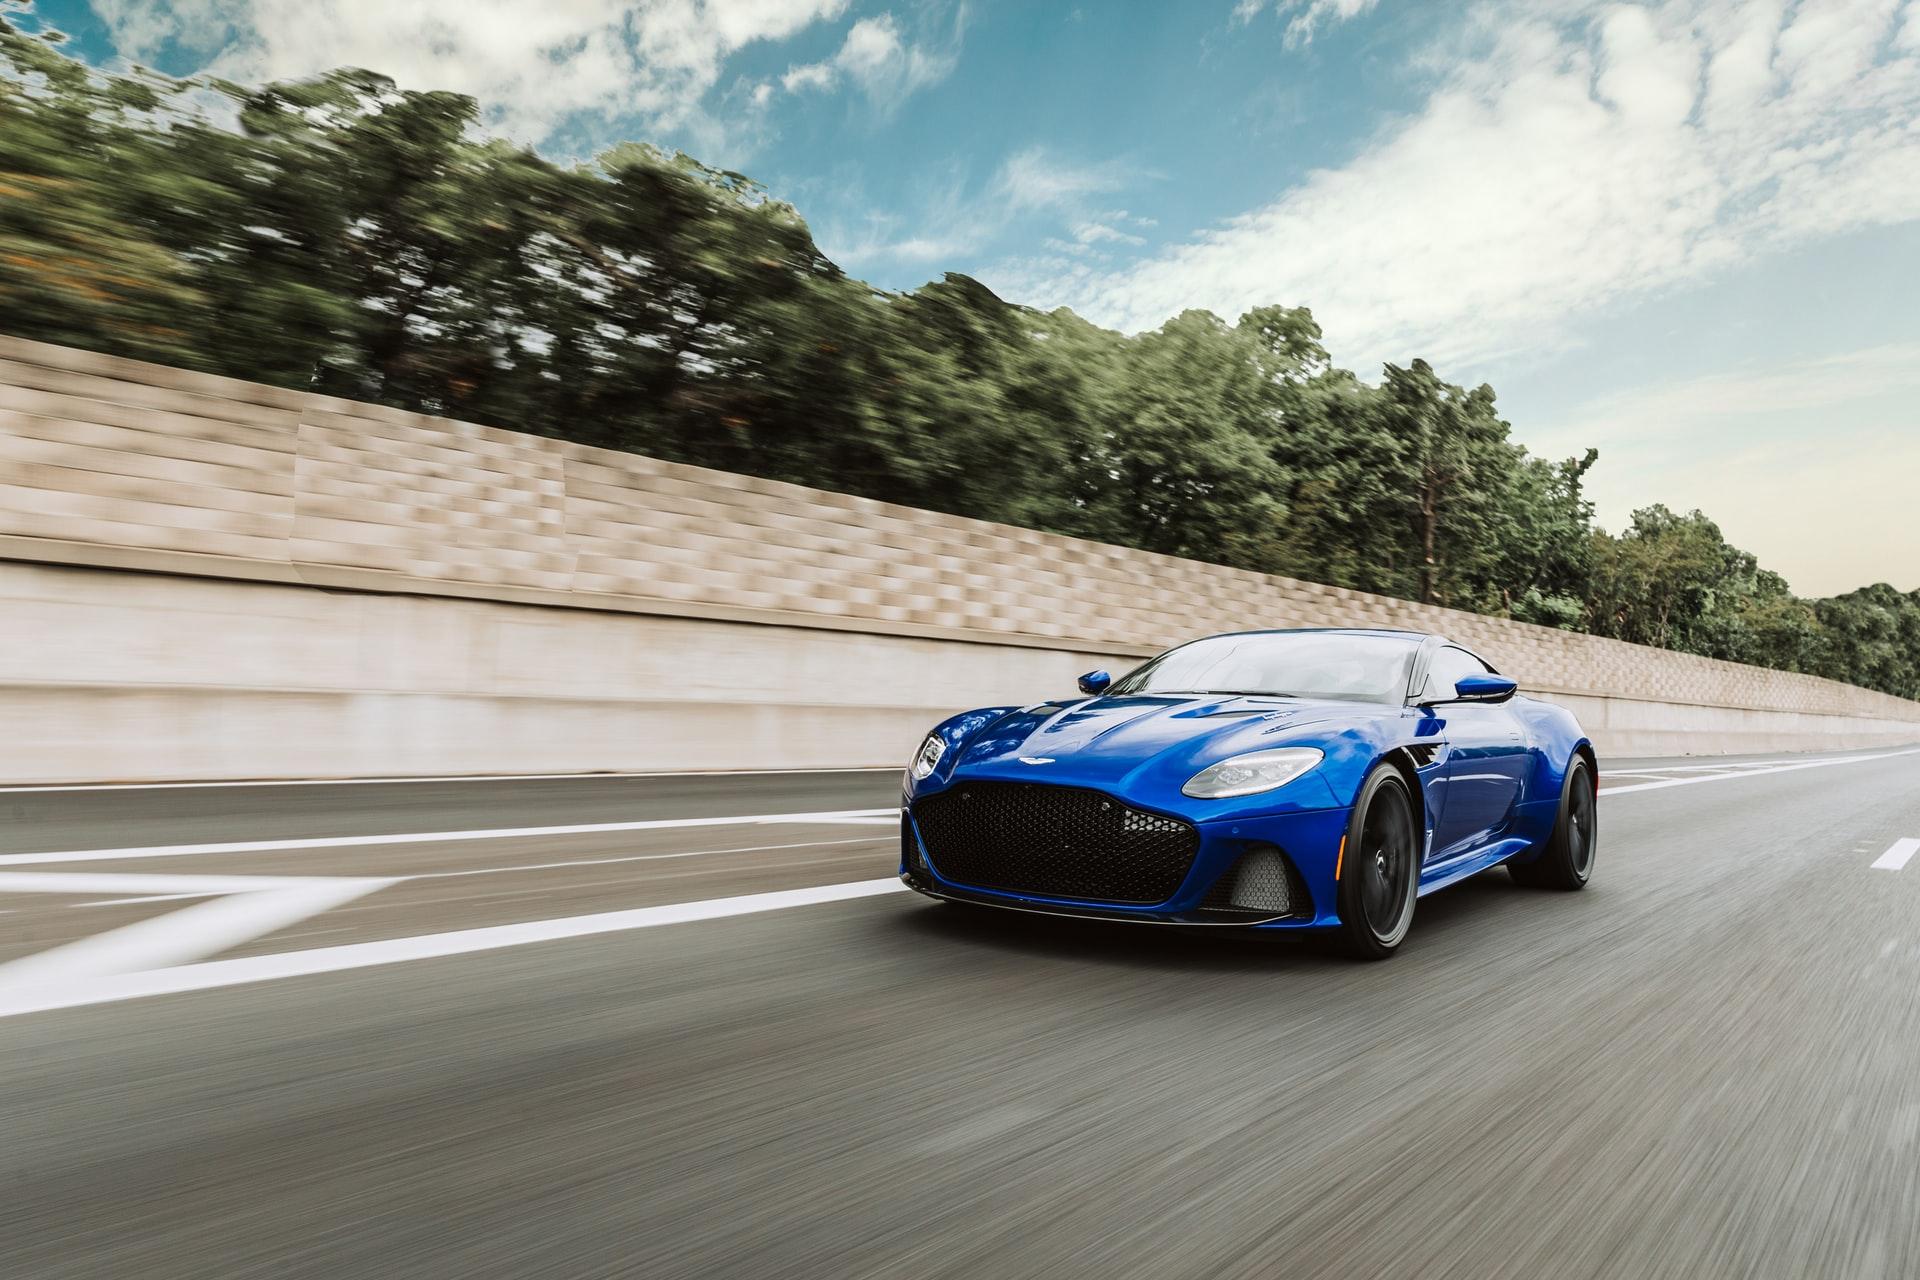 Aston Martin is known worldwide for its fast and eye-catching sports cars.